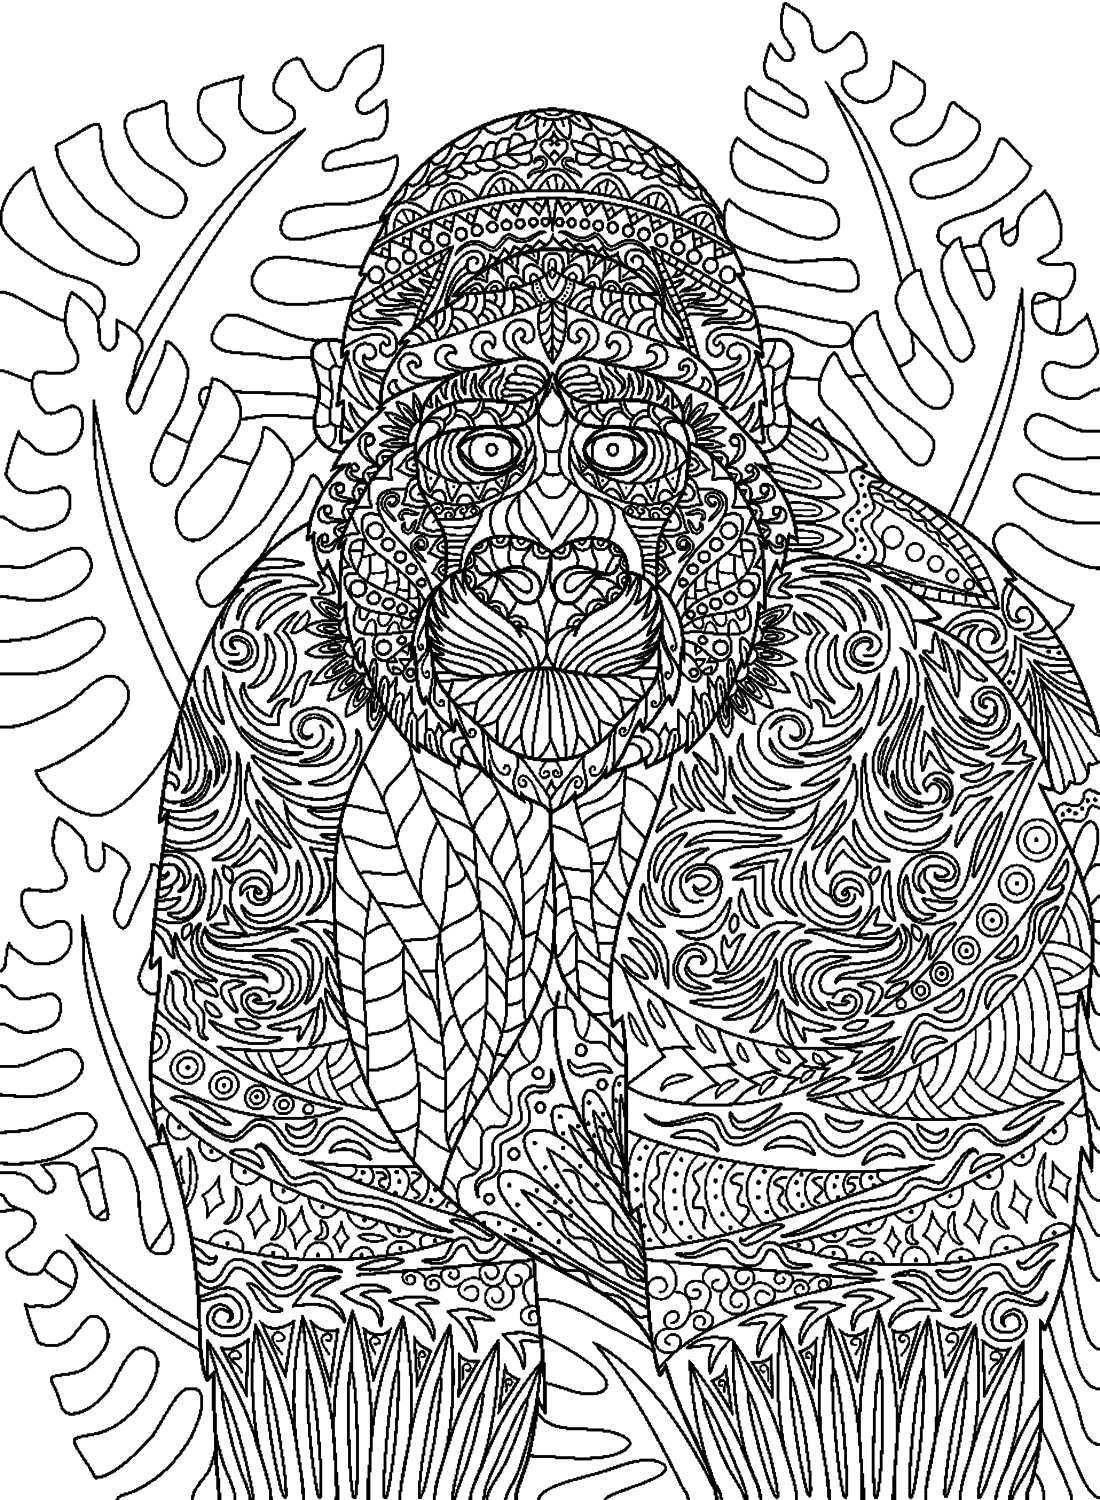 Gorilla In Zentangle Style Coloring Pages